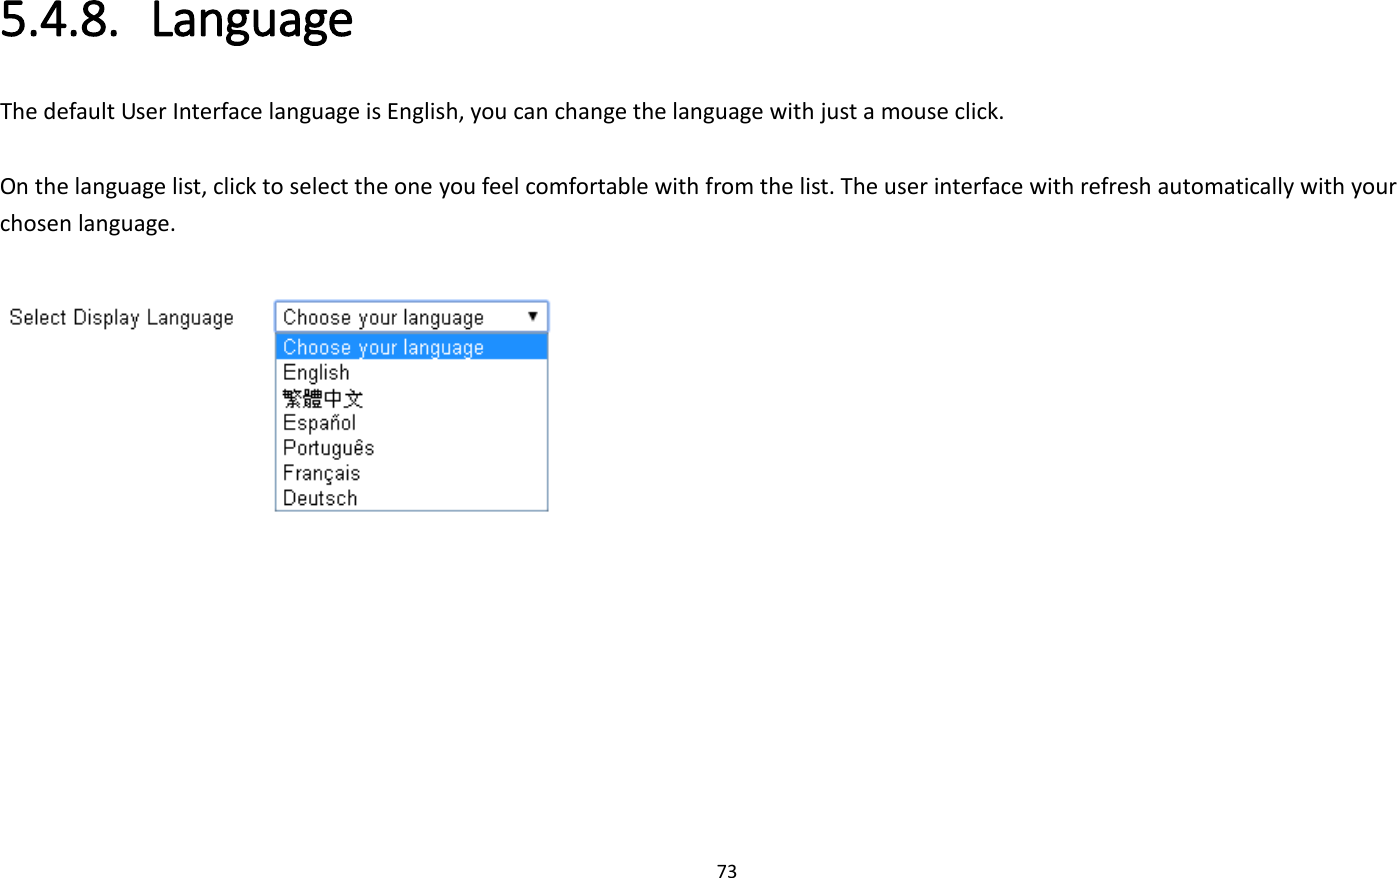 73  5.4.8. Language The default User Interface language is English, you can change the language with just a mouse click.    On the language list, click to select the one you feel comfortable with from the list. The user interface with refresh automatically with your chosen language.         